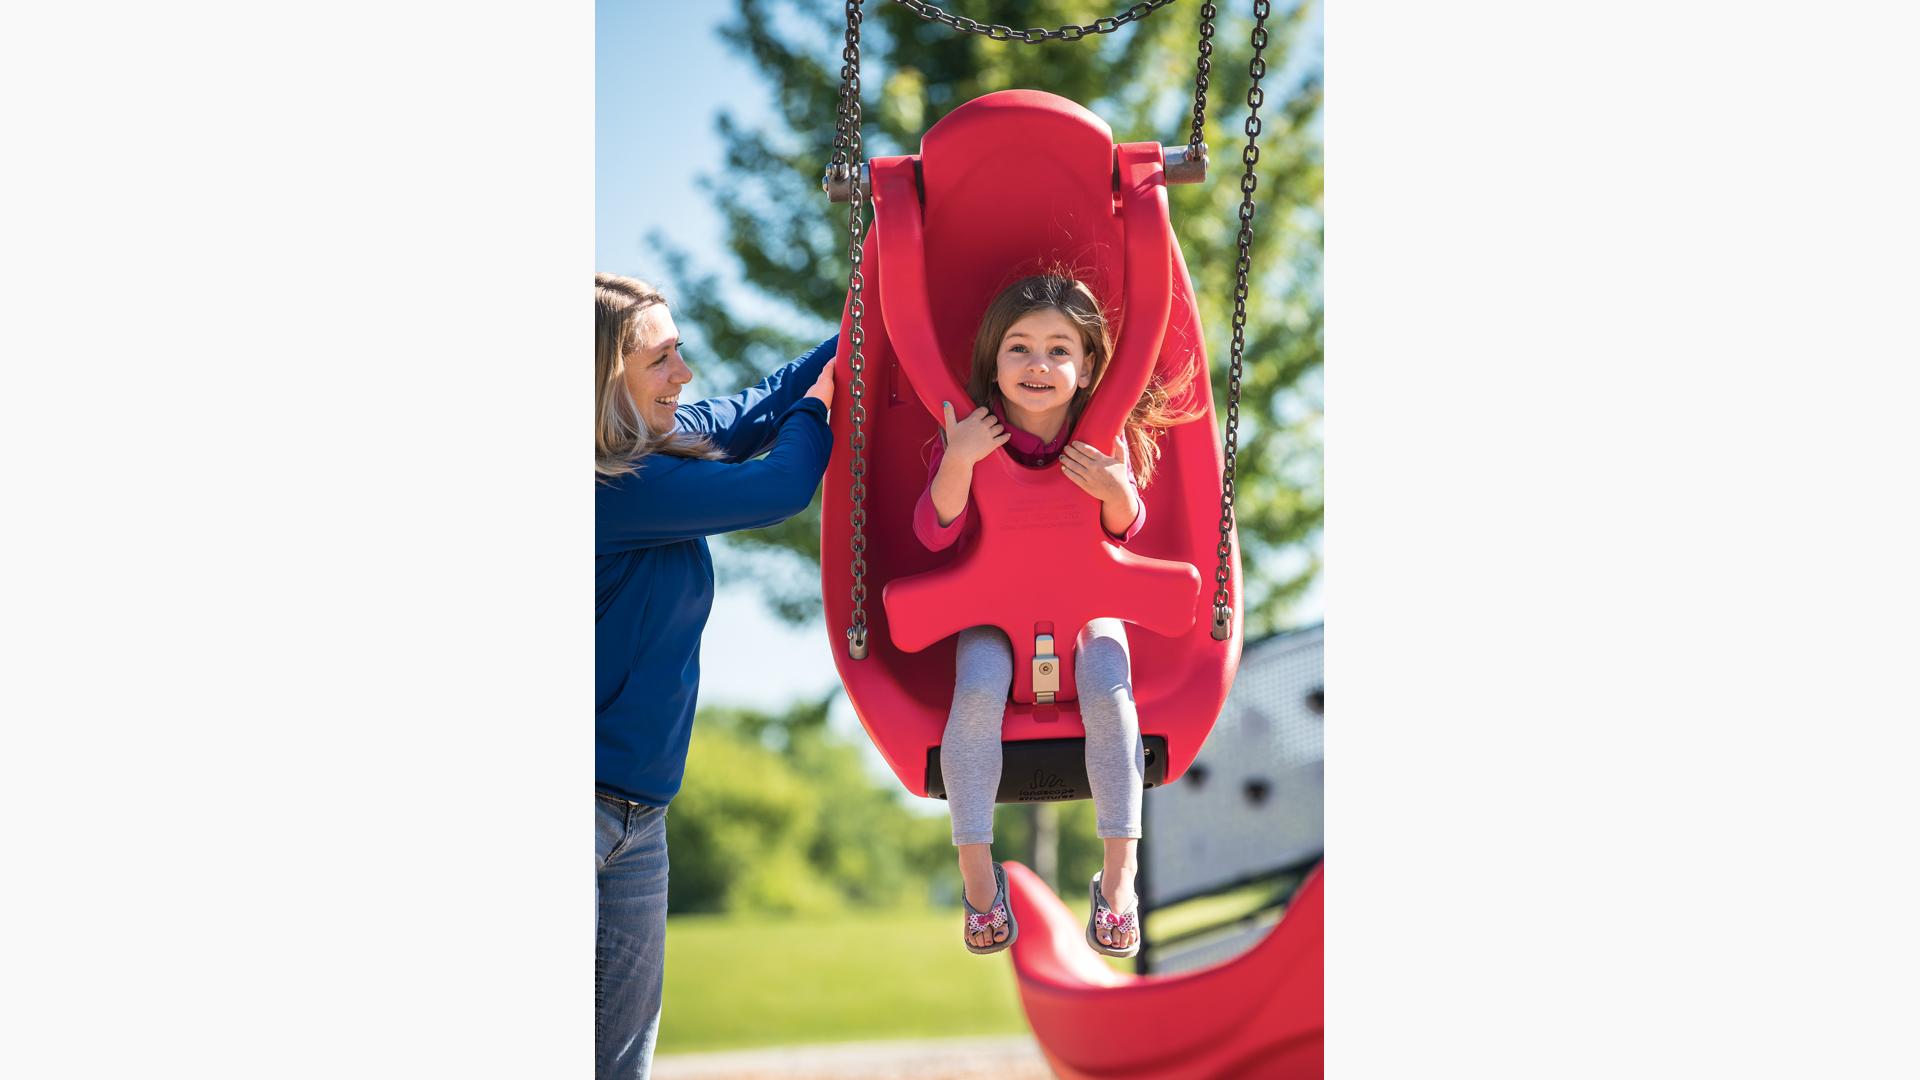 the Molded Bucket Seat With Harness and Chains for Ages 2 to 5 is a sturdy and fun playground swing seat option for children who need additional upper body support.